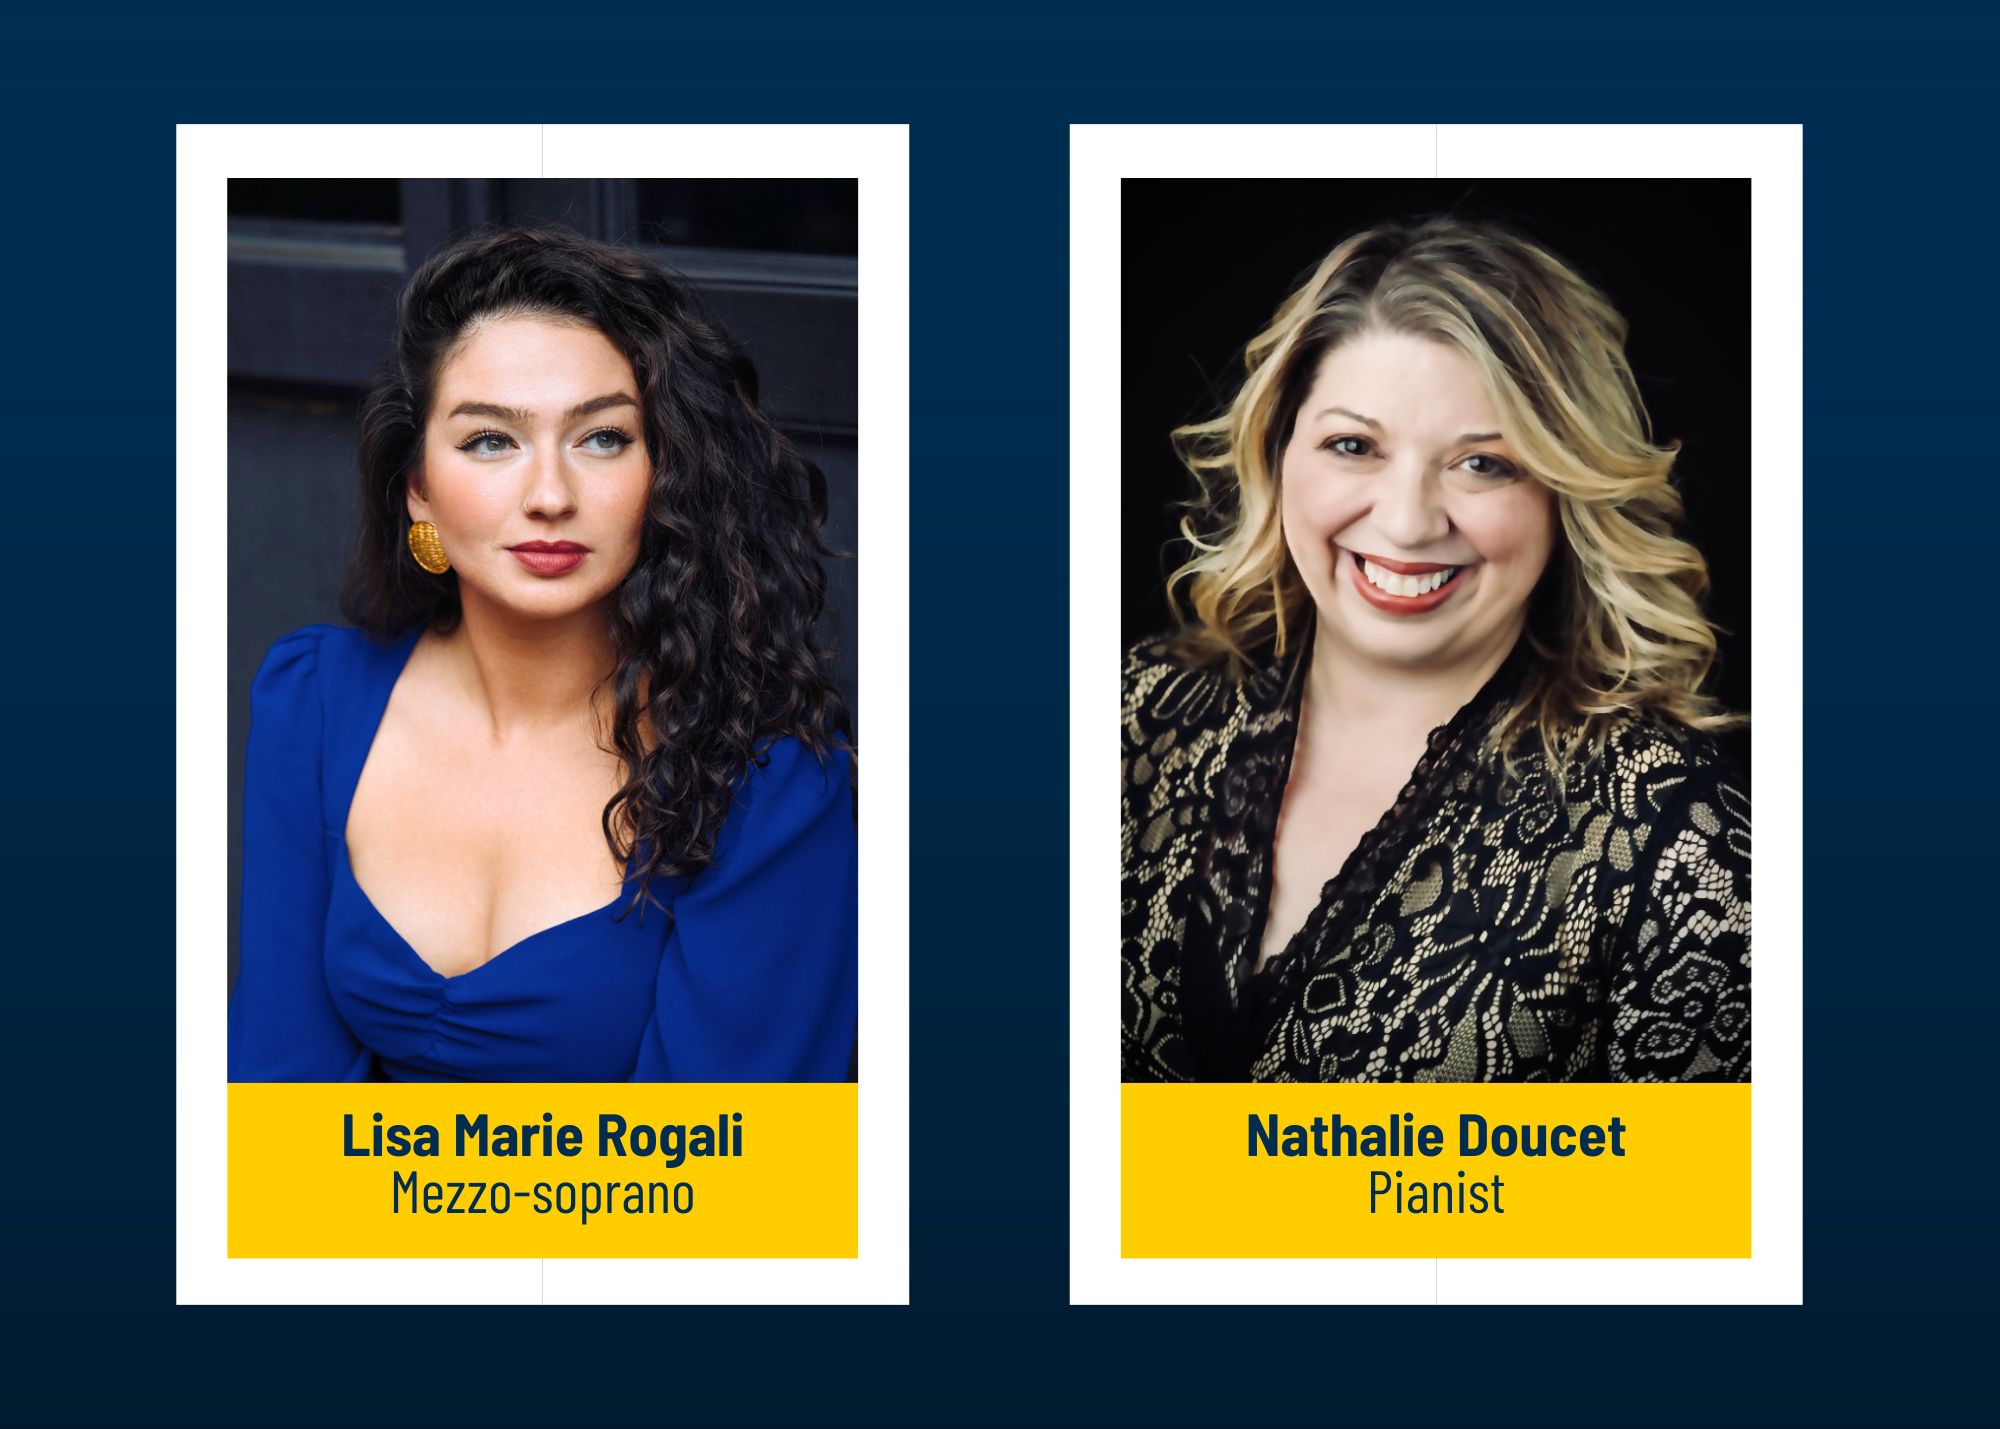 award-winning mezzo-soprano Lisa Marie Rogali and sought-after pianist and vocal coach Nathalie Doucet